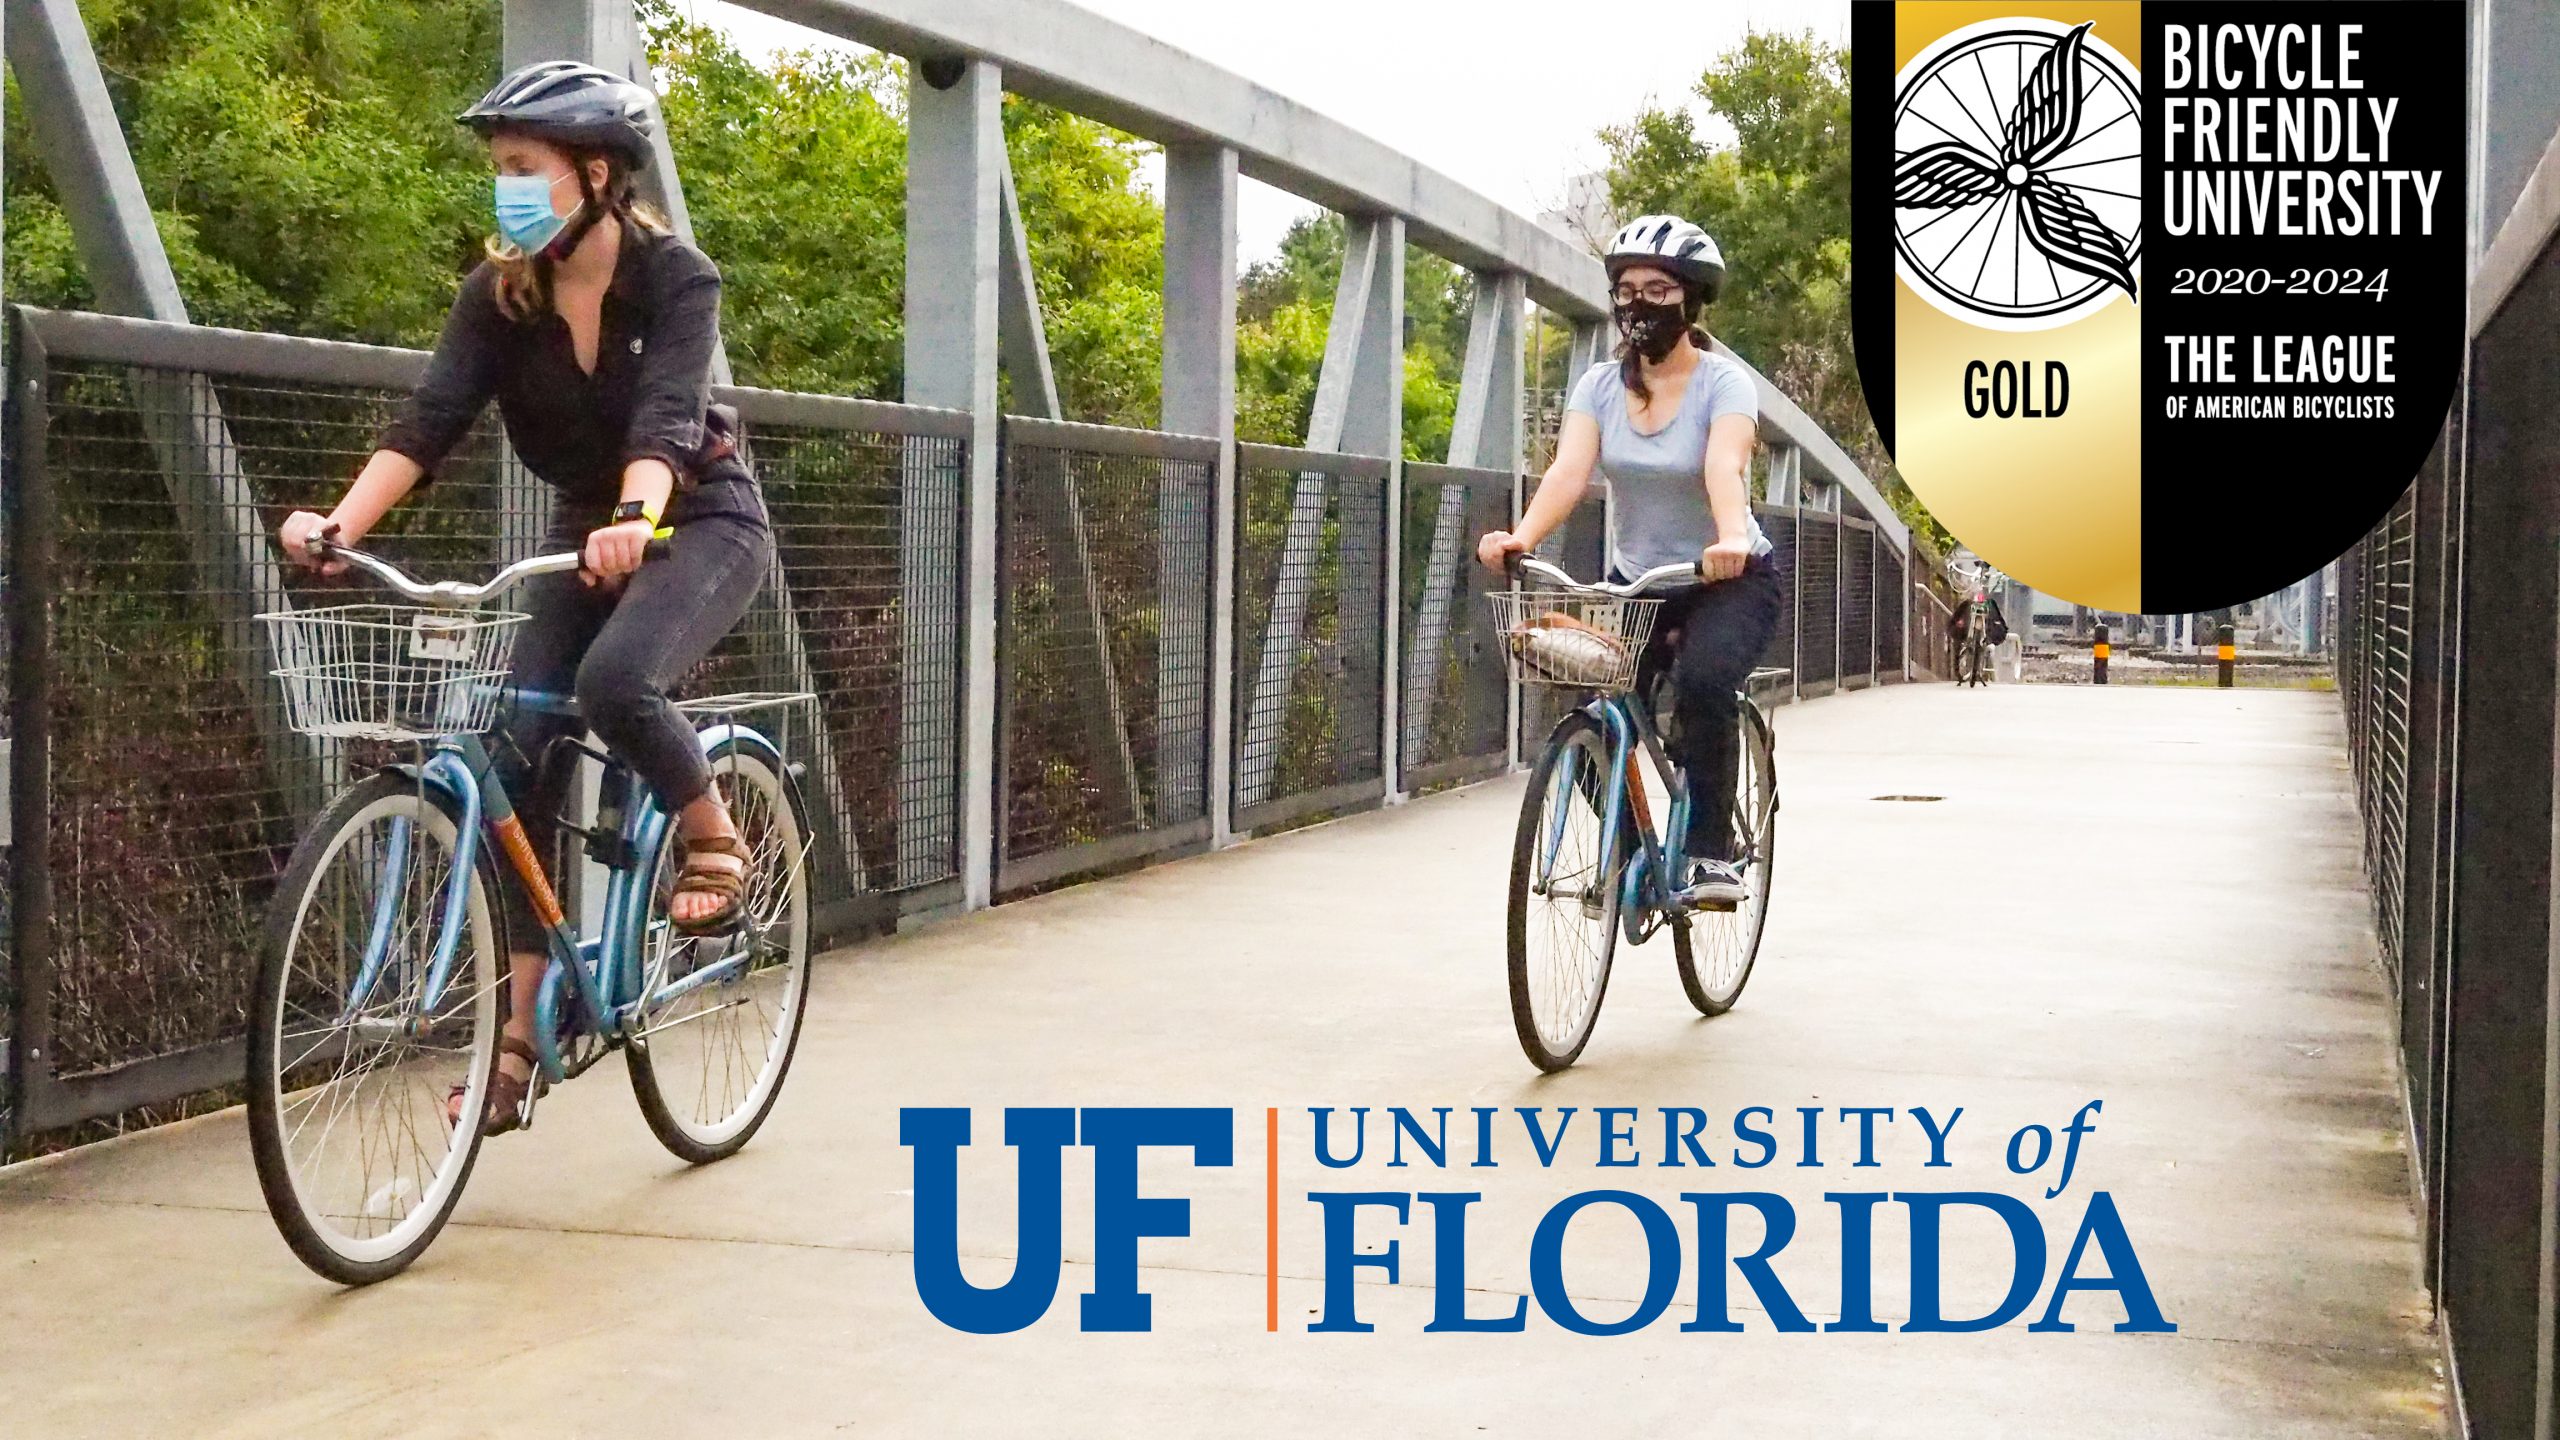 UF Named a Gold Bicycle Friendly University by the League of American Bicyclists